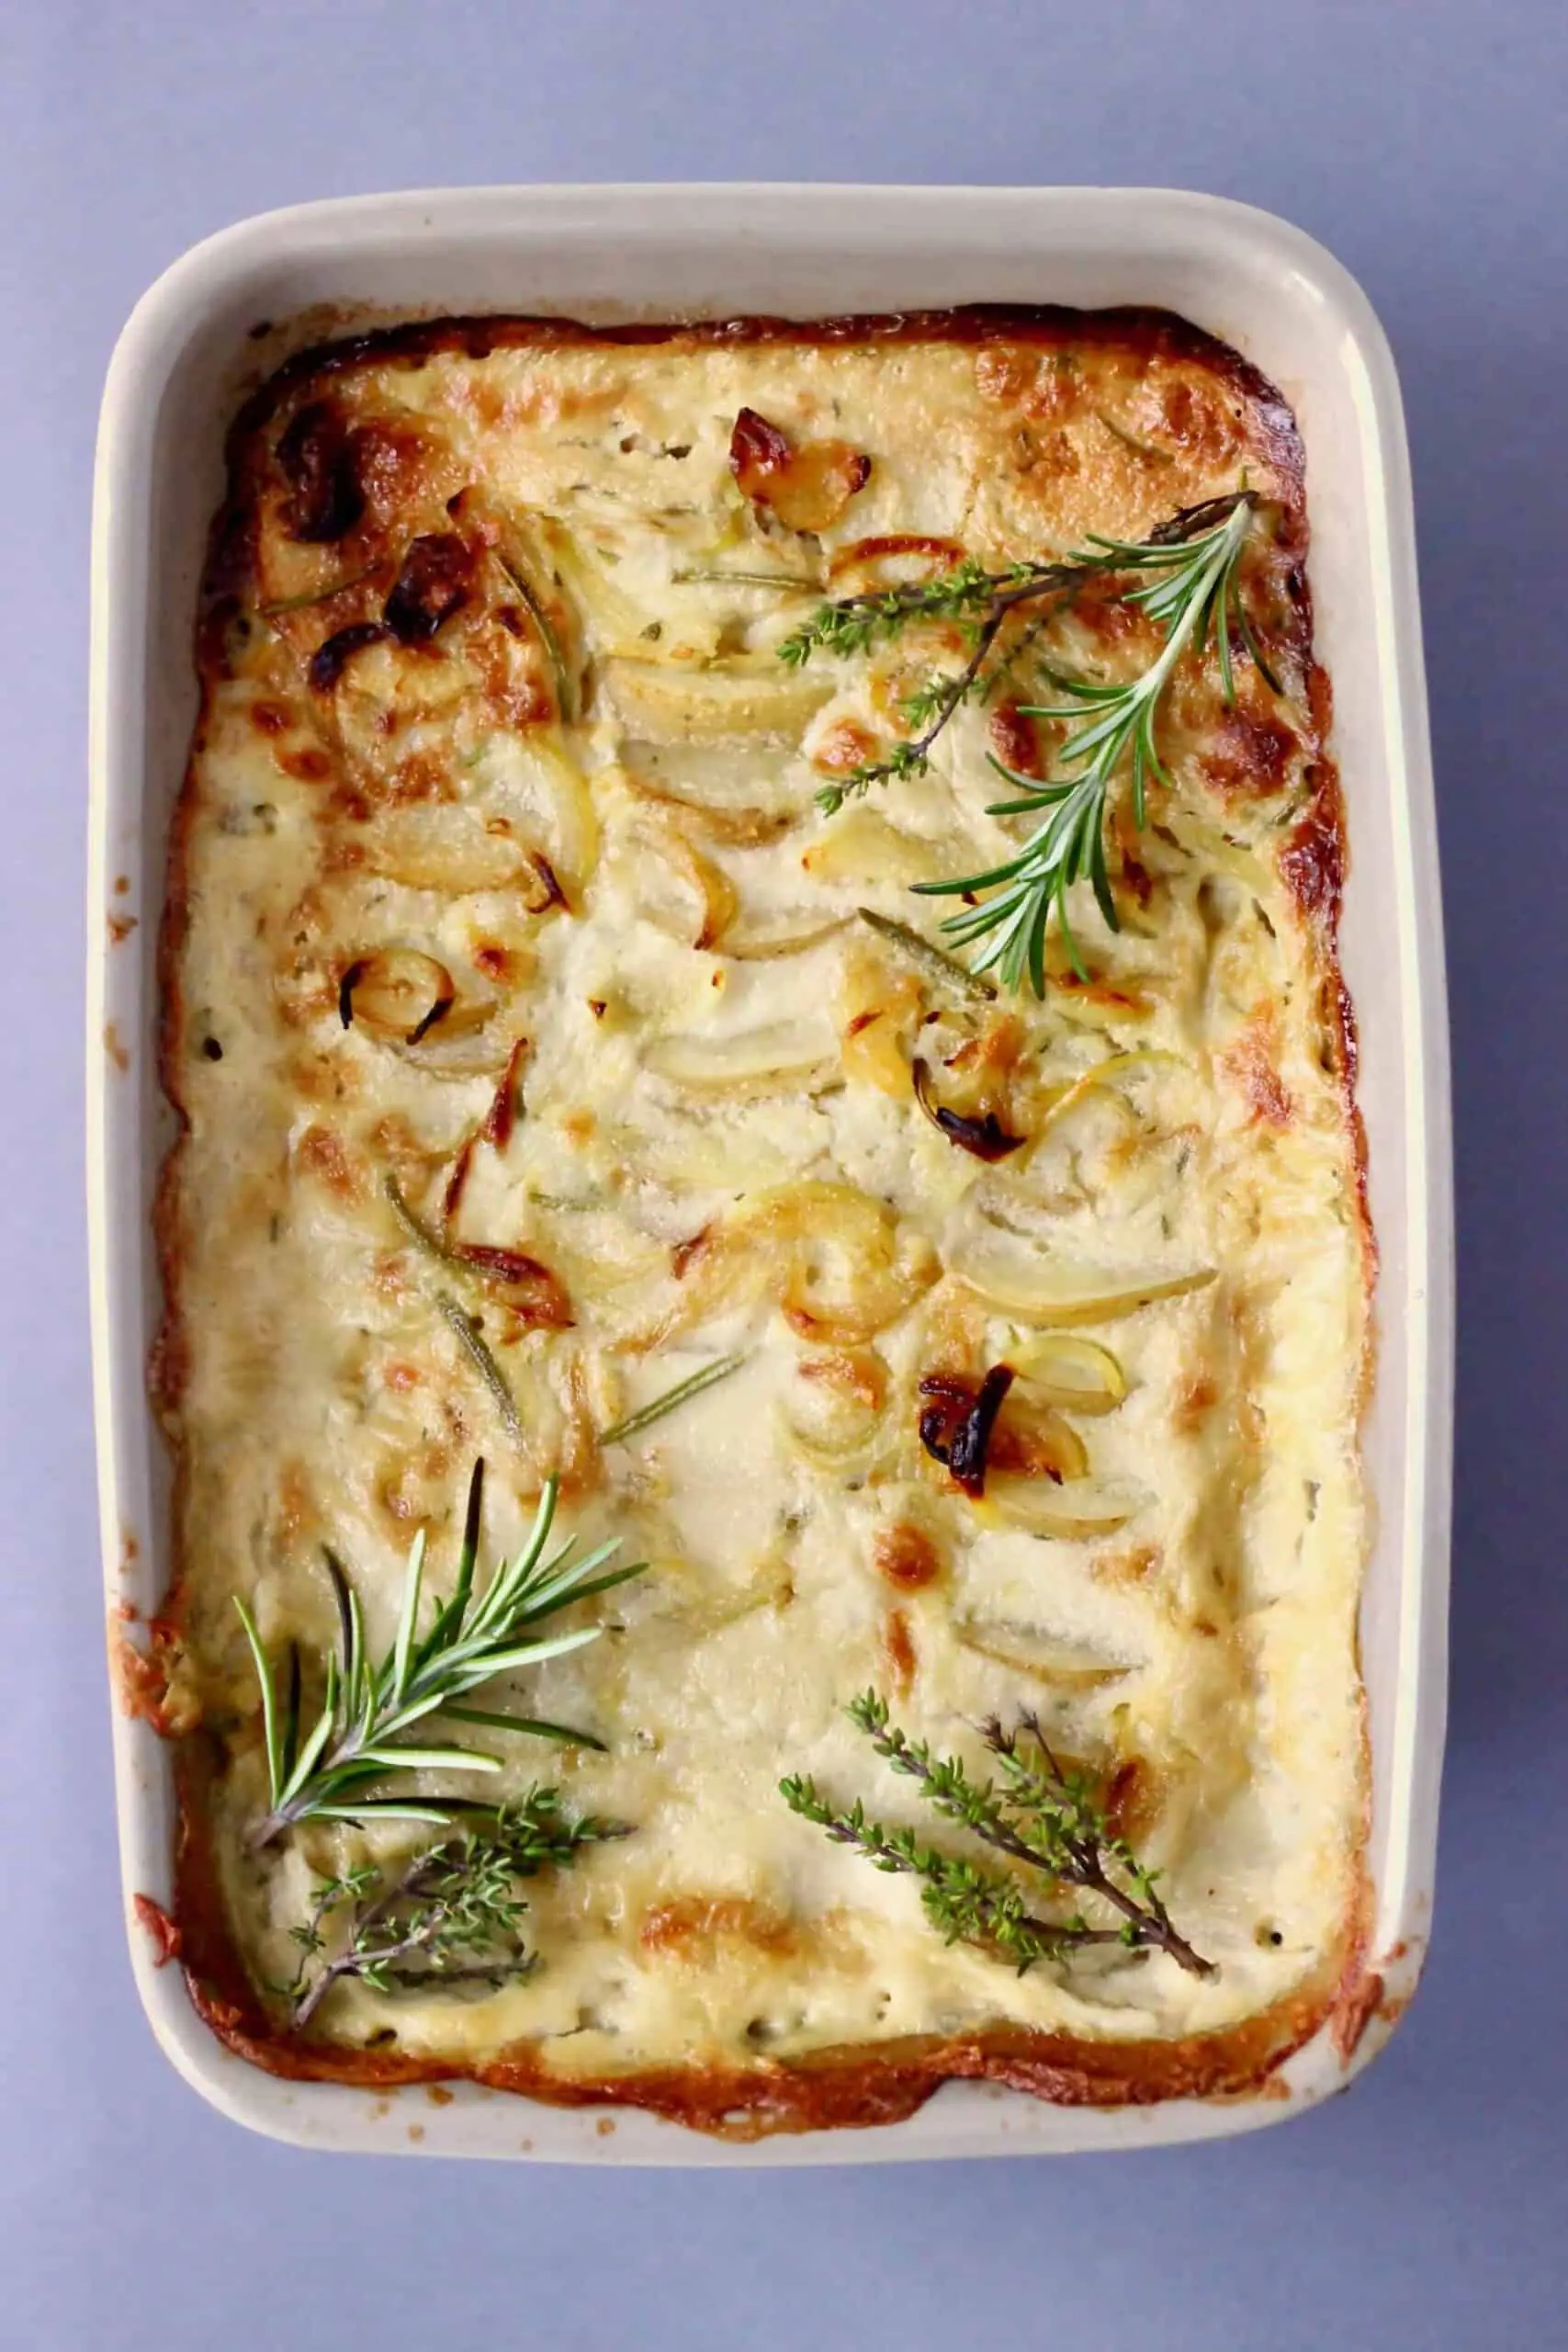 Vegan scalloped potatoes topped with thyme and rosemary in a baking dish